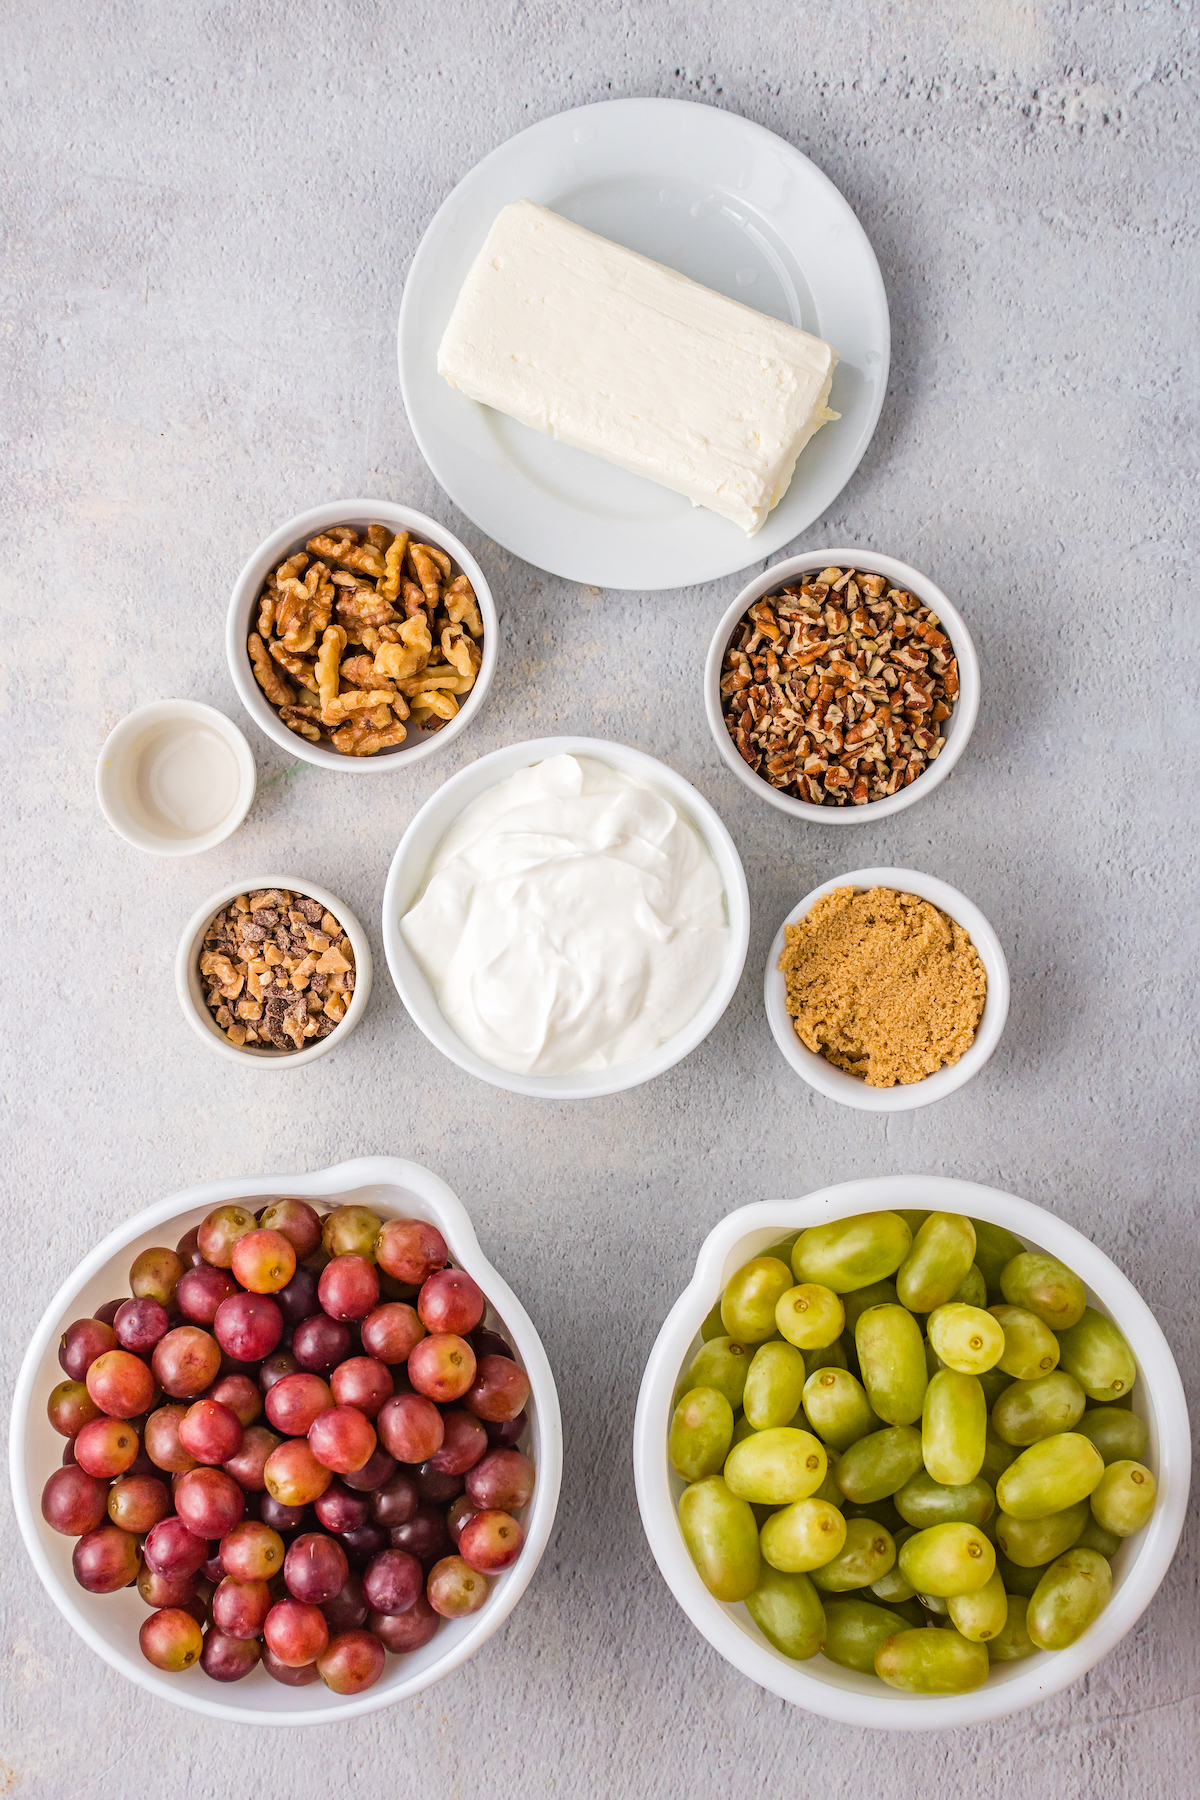 From top: Cream cheese, chopped pecans, chopped walnuts, vanilla, Heath crumbles, sour cream, brown sugar, red grapes, green grapes.